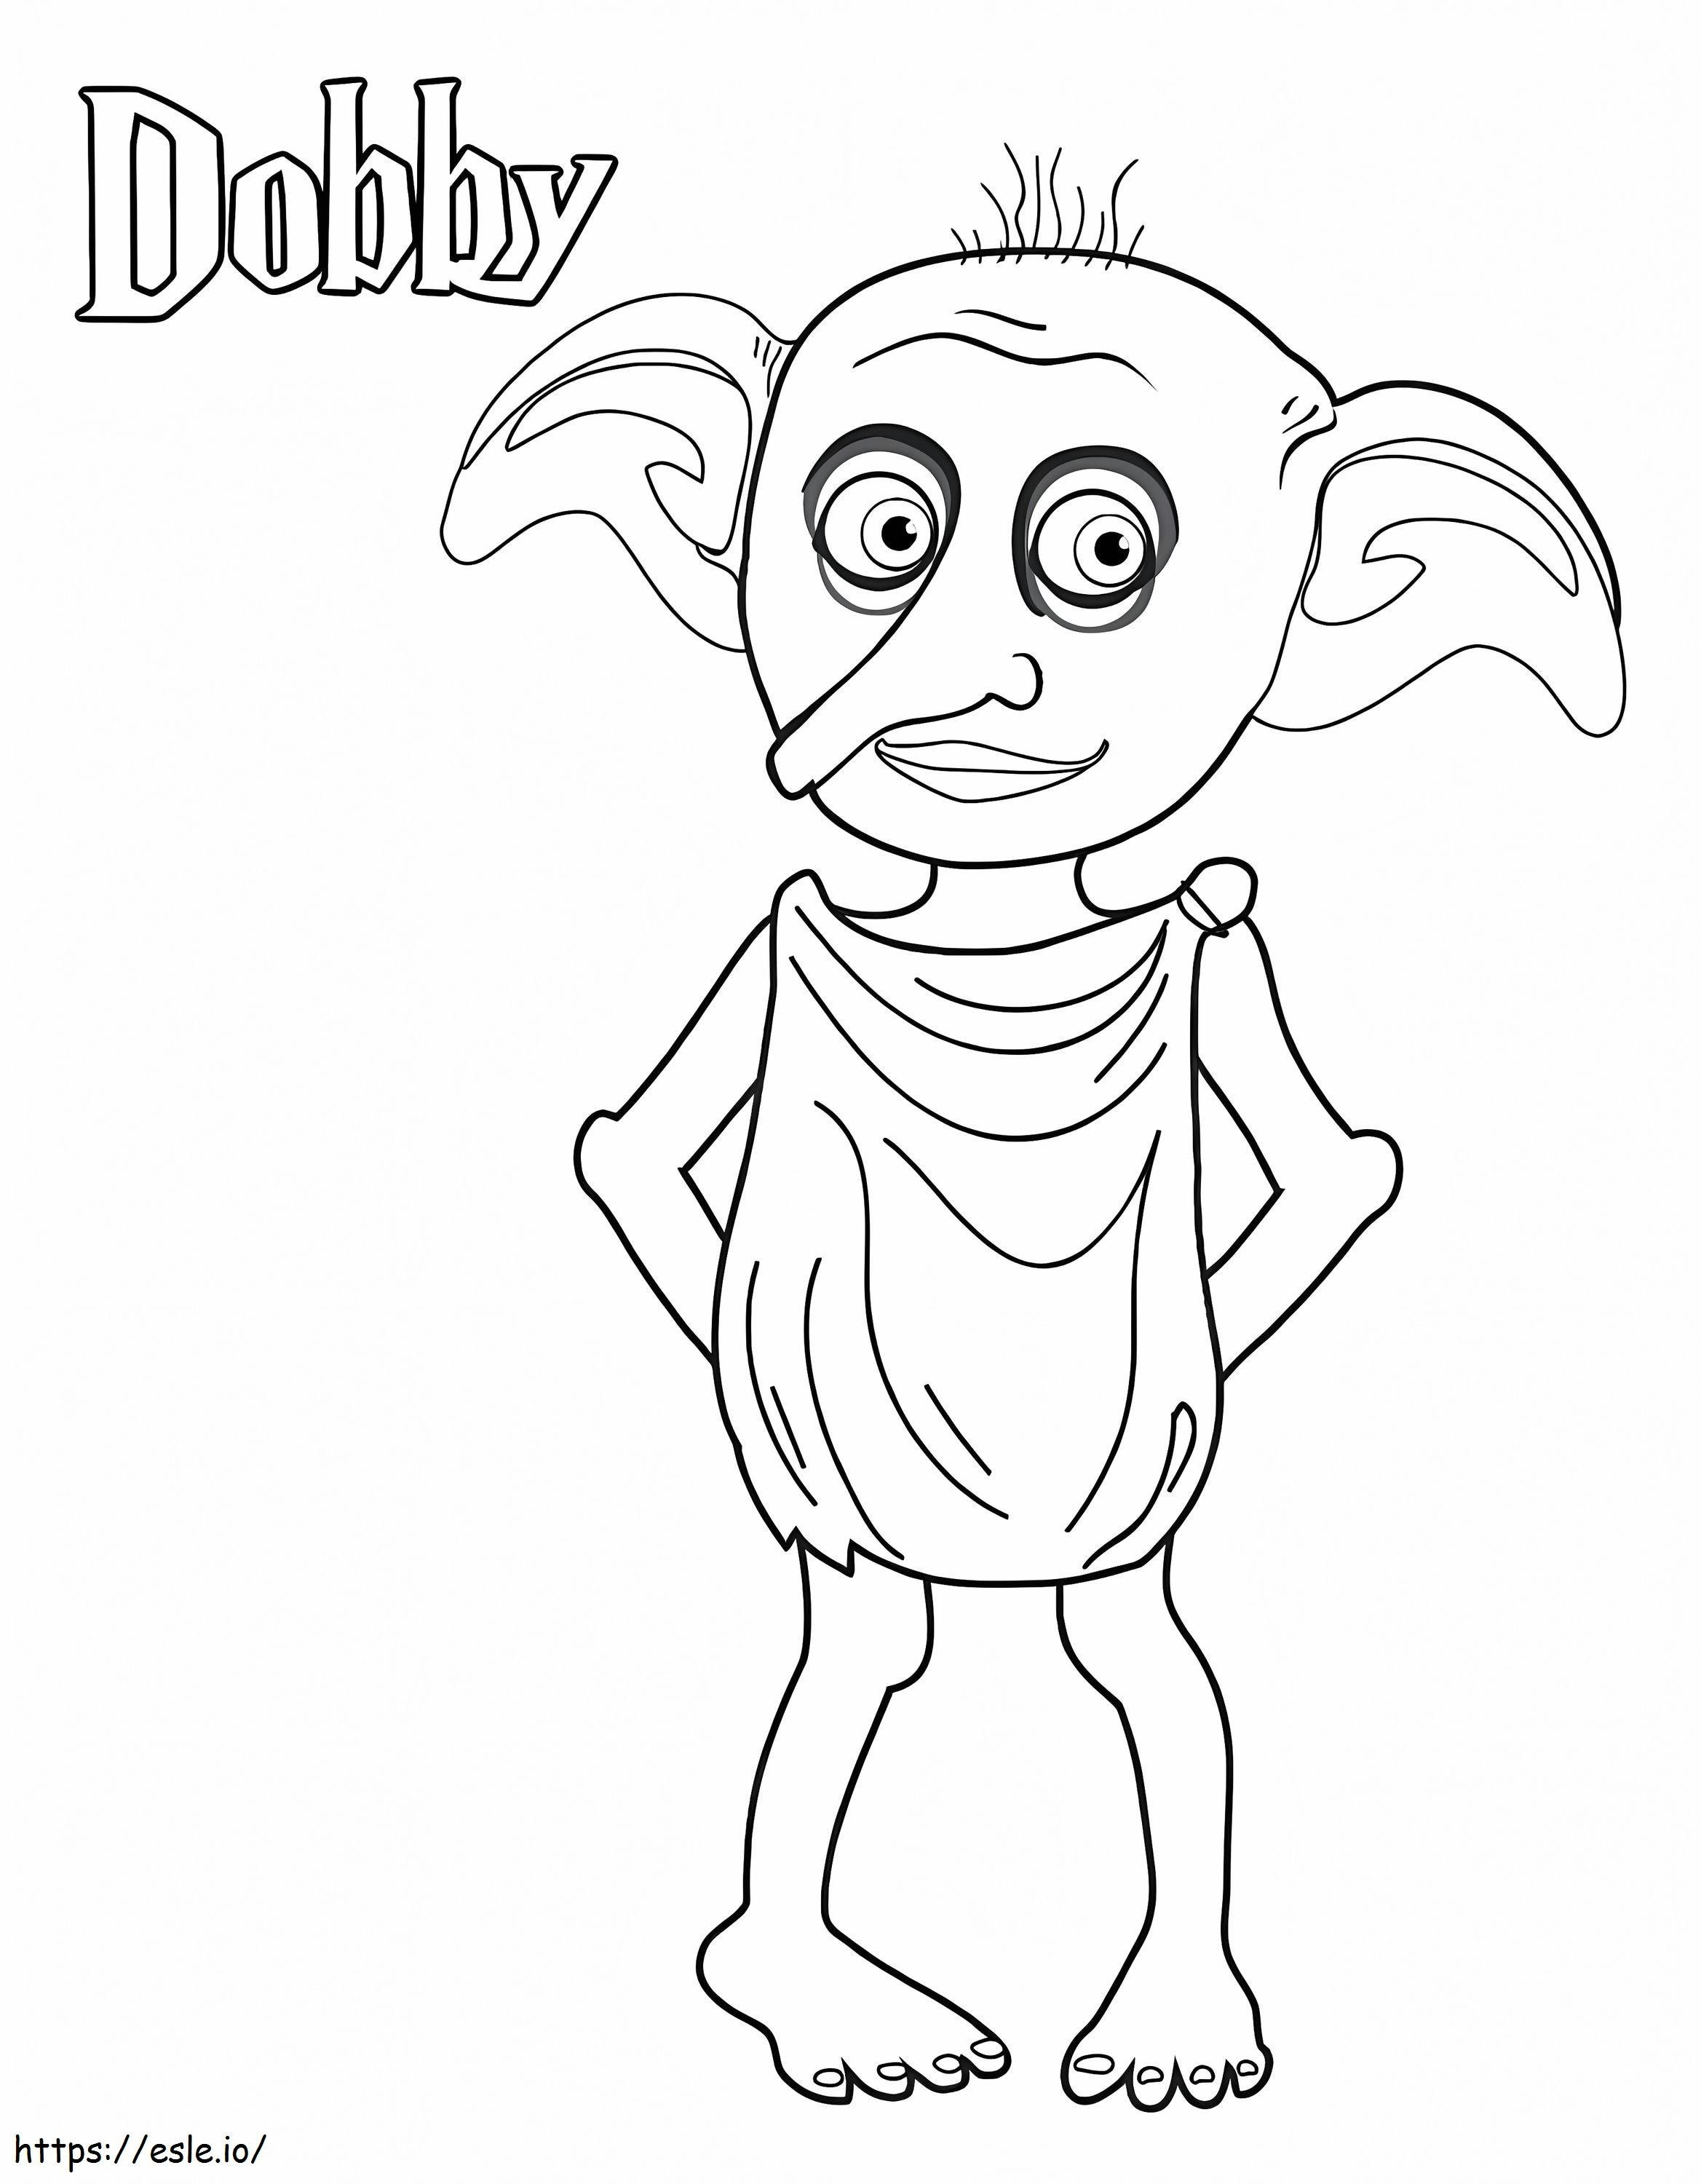 Dobby 1 coloring page